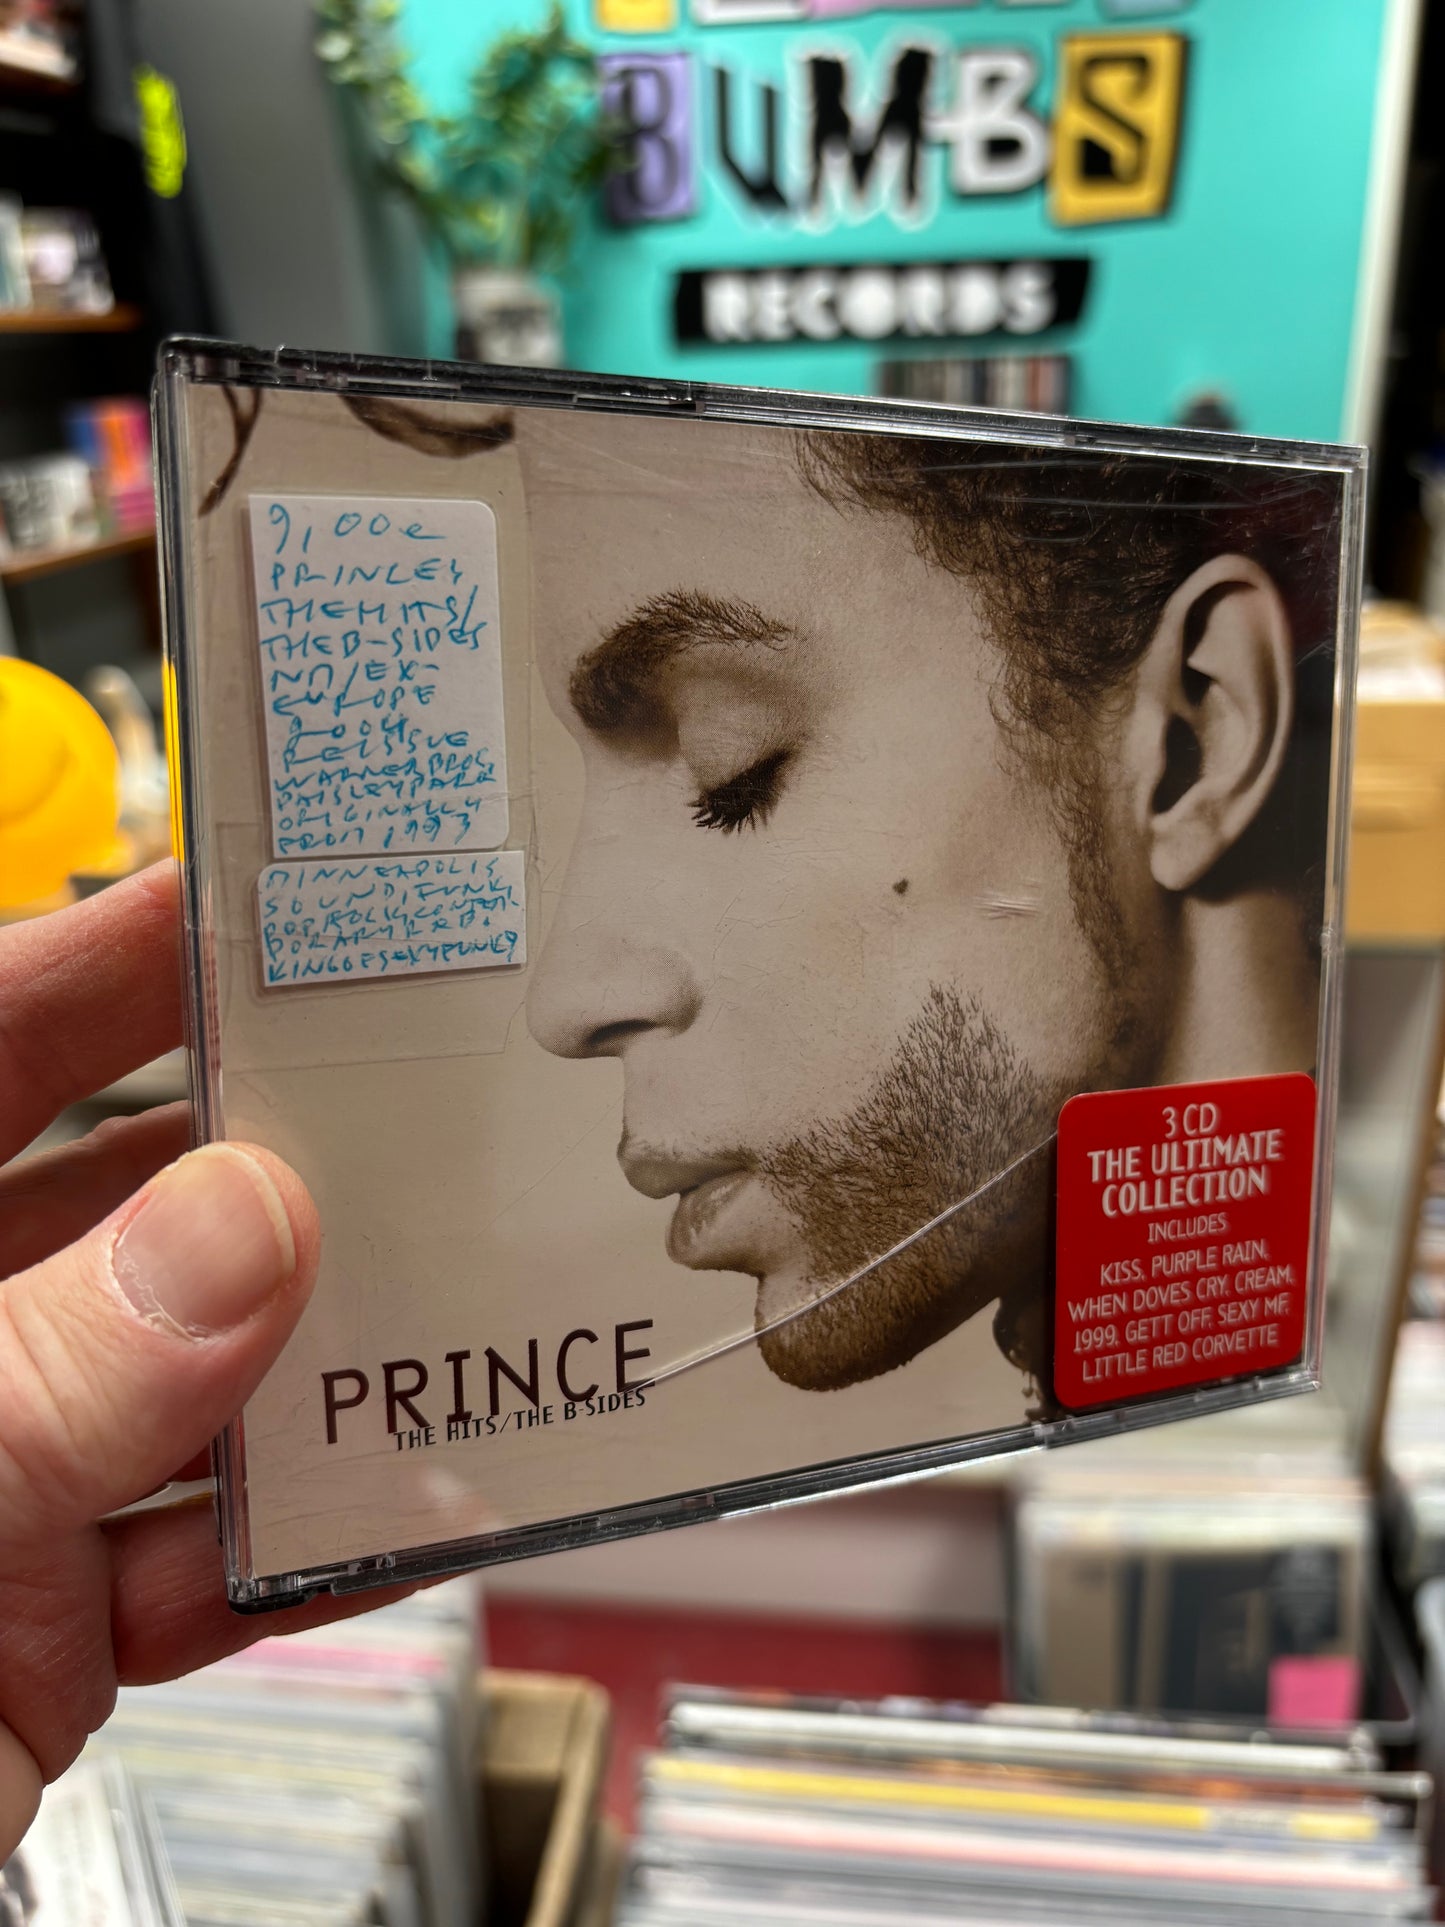 Prince: The Hits/The B-Sides, 3CD box, reissue, Europe 2004